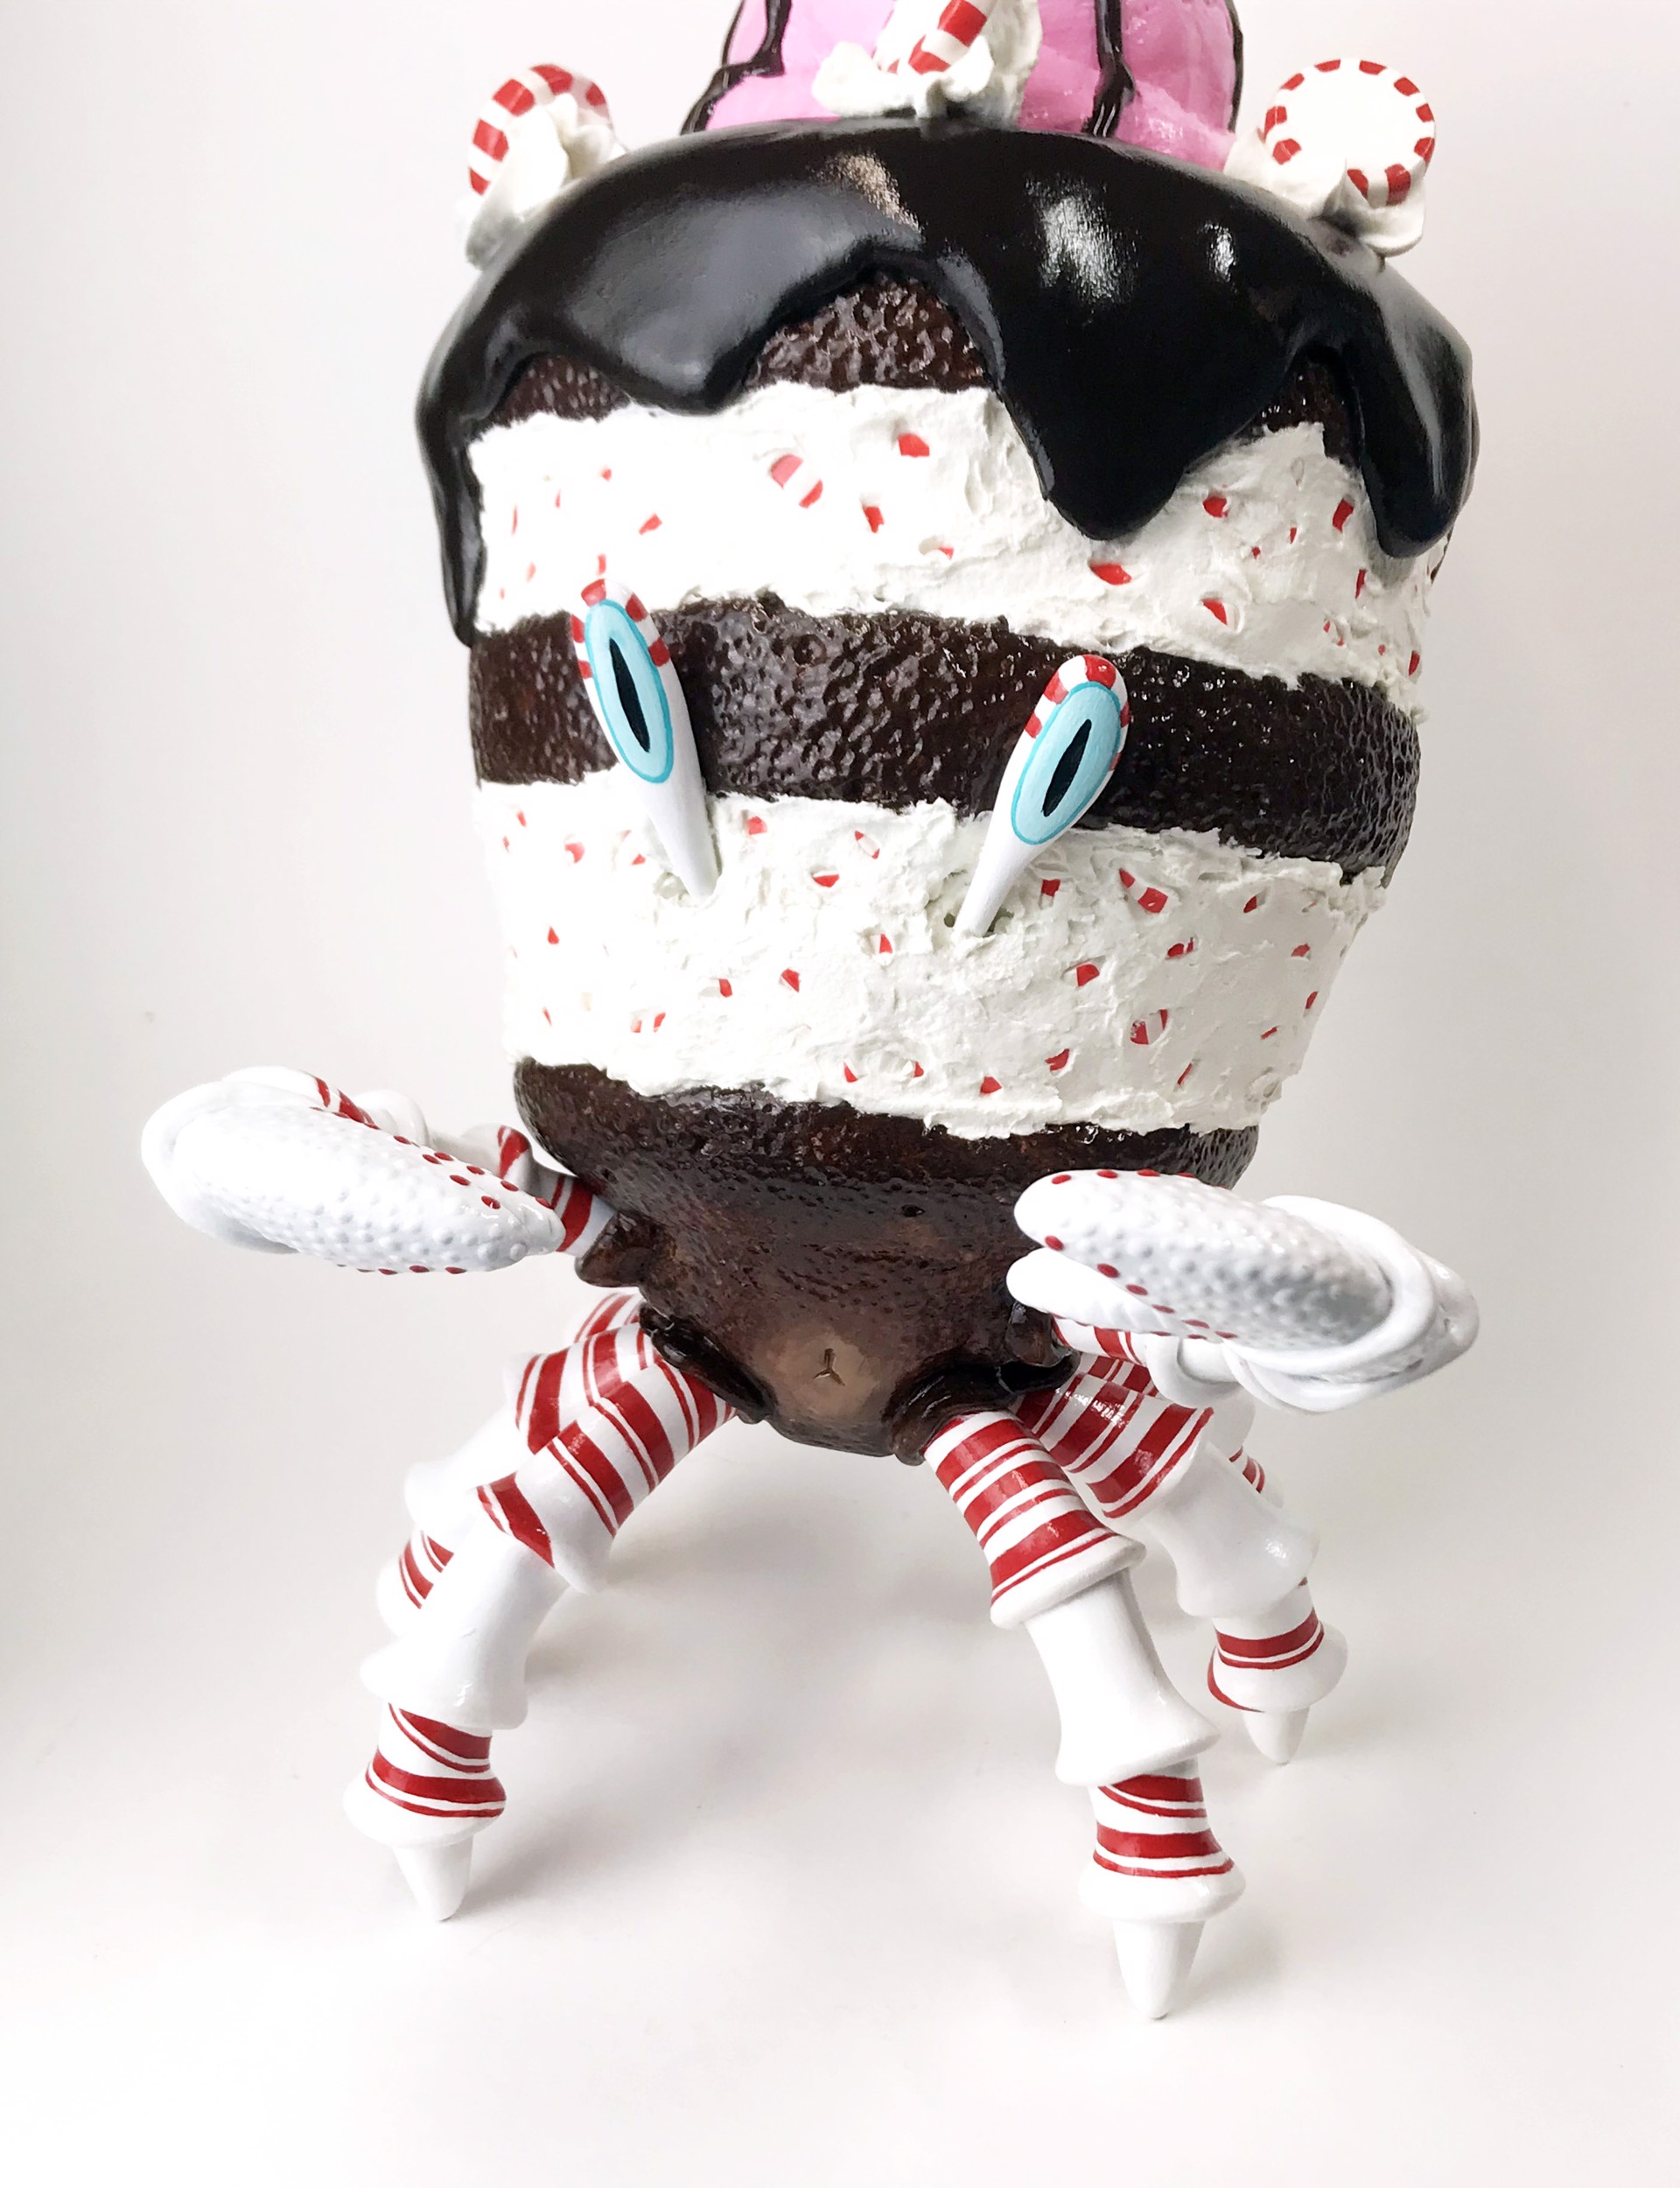 Peppermint Crabcake by Corina St. Martin